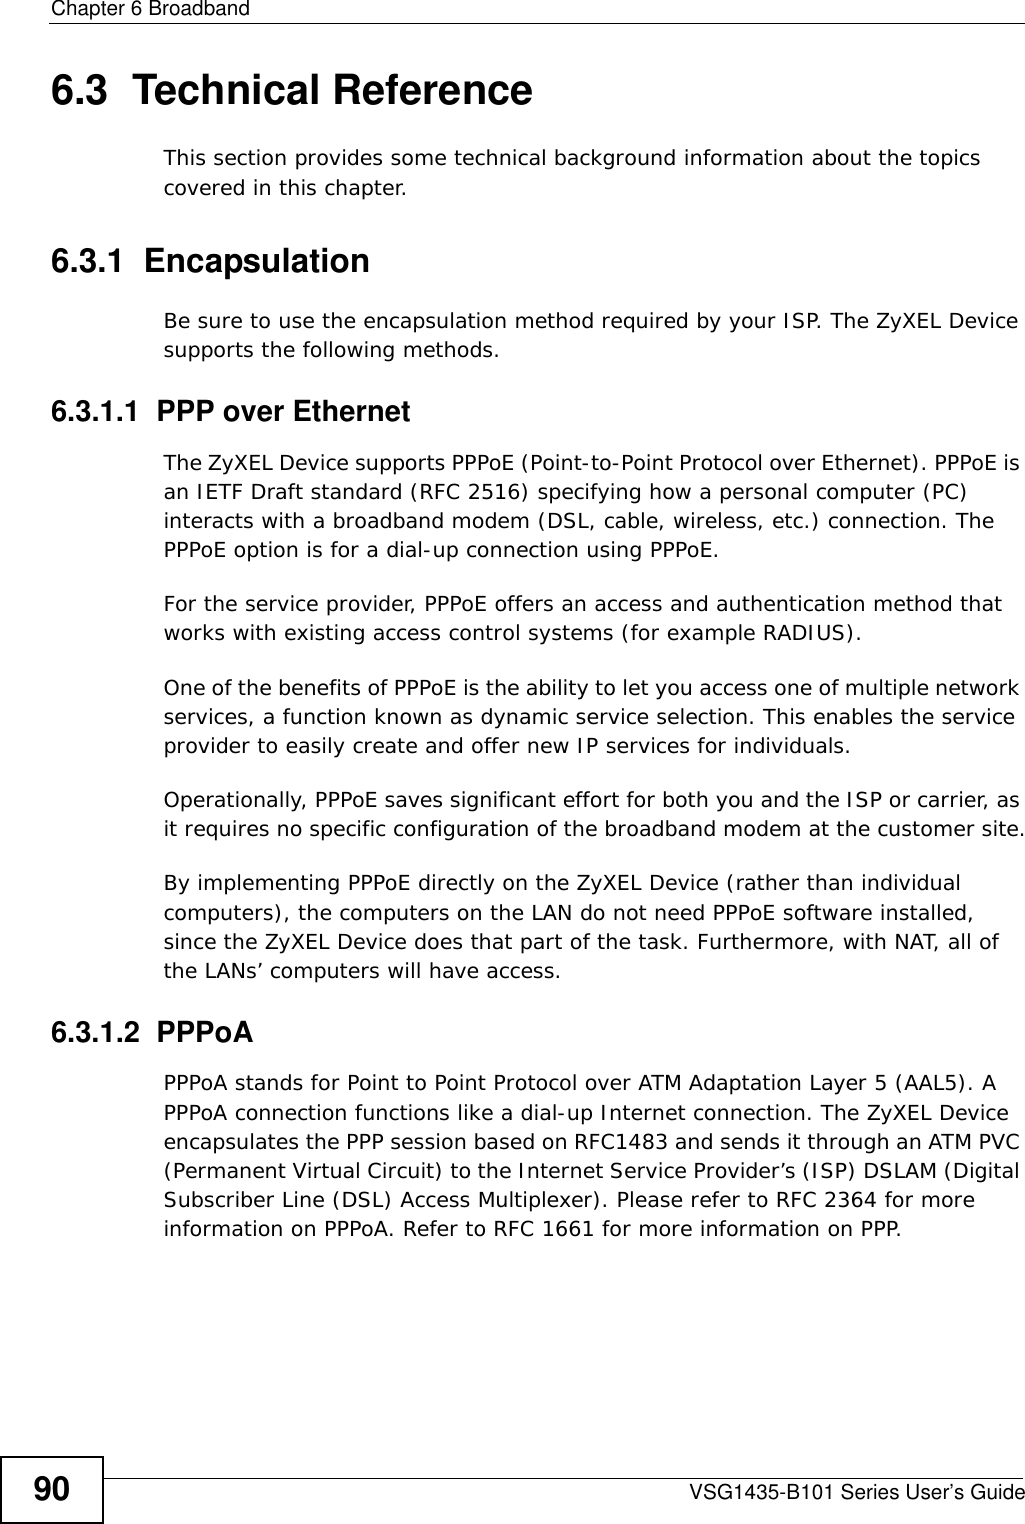 Chapter 6 BroadbandVSG1435-B101 Series User’s Guide906.3  Technical ReferenceThis section provides some technical background information about the topics covered in this chapter.6.3.1  EncapsulationBe sure to use the encapsulation method required by your ISP. The ZyXEL Device supports the following methods.6.3.1.1  PPP over EthernetThe ZyXEL Device supports PPPoE (Point-to-Point Protocol over Ethernet). PPPoE is an IETF Draft standard (RFC 2516) specifying how a personal computer (PC) interacts with a broadband modem (DSL, cable, wireless, etc.) connection. The PPPoE option is for a dial-up connection using PPPoE.For the service provider, PPPoE offers an access and authentication method that works with existing access control systems (for example RADIUS).One of the benefits of PPPoE is the ability to let you access one of multiple network services, a function known as dynamic service selection. This enables the service provider to easily create and offer new IP services for individuals.Operationally, PPPoE saves significant effort for both you and the ISP or carrier, as it requires no specific configuration of the broadband modem at the customer site.By implementing PPPoE directly on the ZyXEL Device (rather than individual computers), the computers on the LAN do not need PPPoE software installed, since the ZyXEL Device does that part of the task. Furthermore, with NAT, all of the LANs’ computers will have access.6.3.1.2  PPPoAPPPoA stands for Point to Point Protocol over ATM Adaptation Layer 5 (AAL5). A PPPoA connection functions like a dial-up Internet connection. The ZyXEL Device encapsulates the PPP session based on RFC1483 and sends it through an ATM PVC (Permanent Virtual Circuit) to the Internet Service Provider’s (ISP) DSLAM (Digital Subscriber Line (DSL) Access Multiplexer). Please refer to RFC 2364 for more information on PPPoA. Refer to RFC 1661 for more information on PPP.